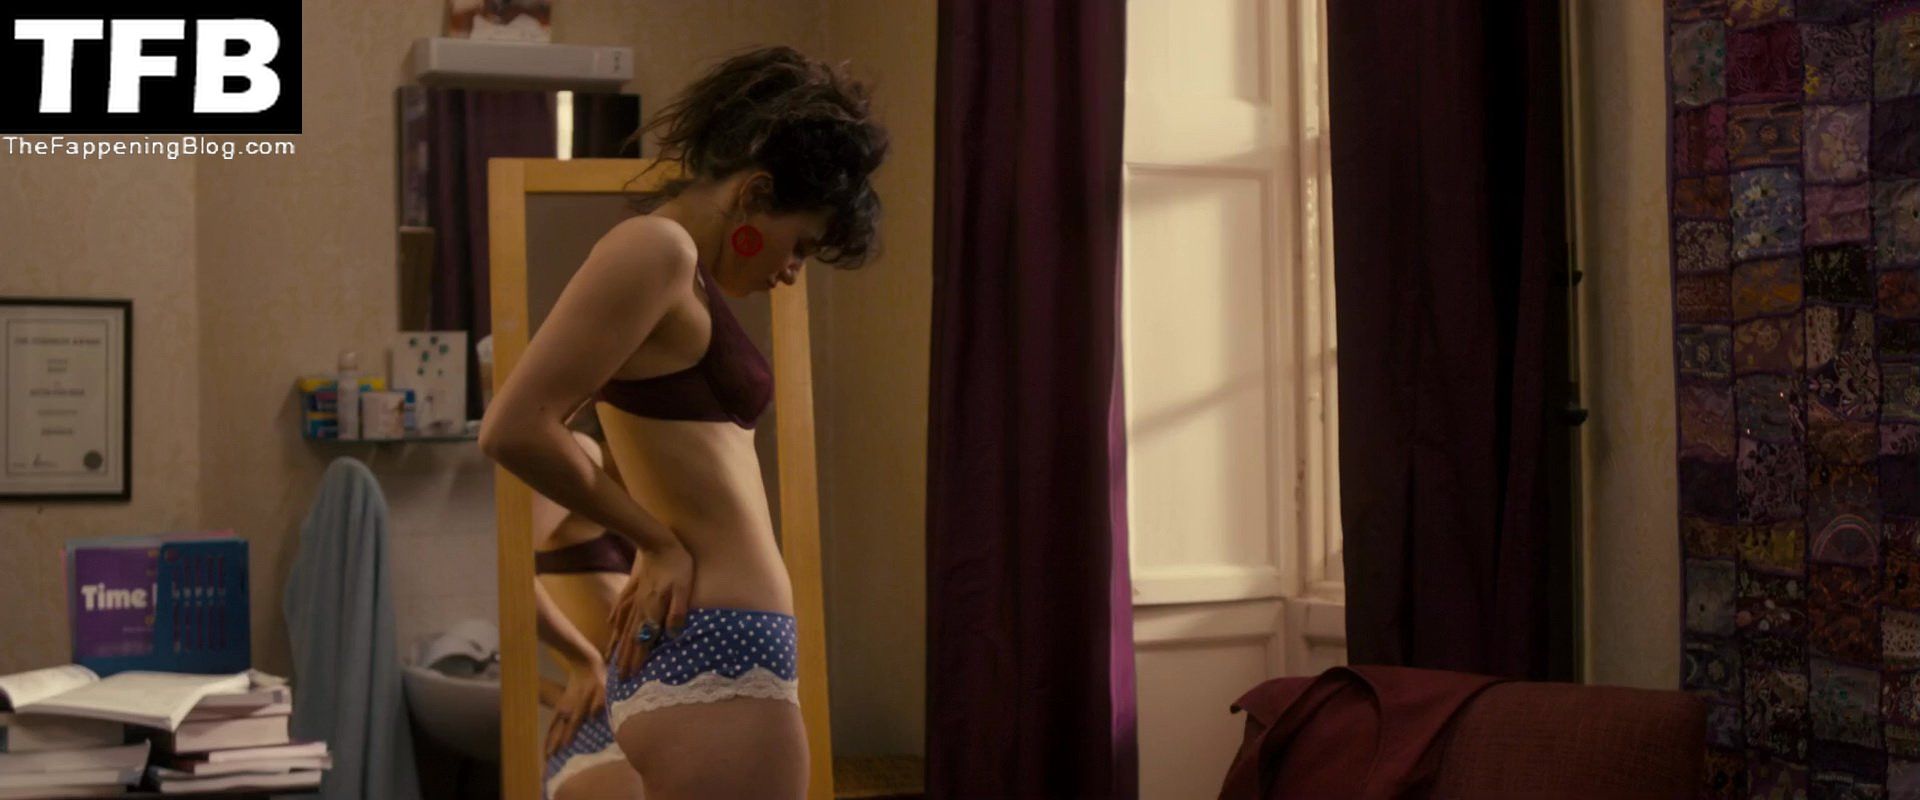 jessica-brown-findlay-the-fappening-792804-thefappeningblog.com_.jpg